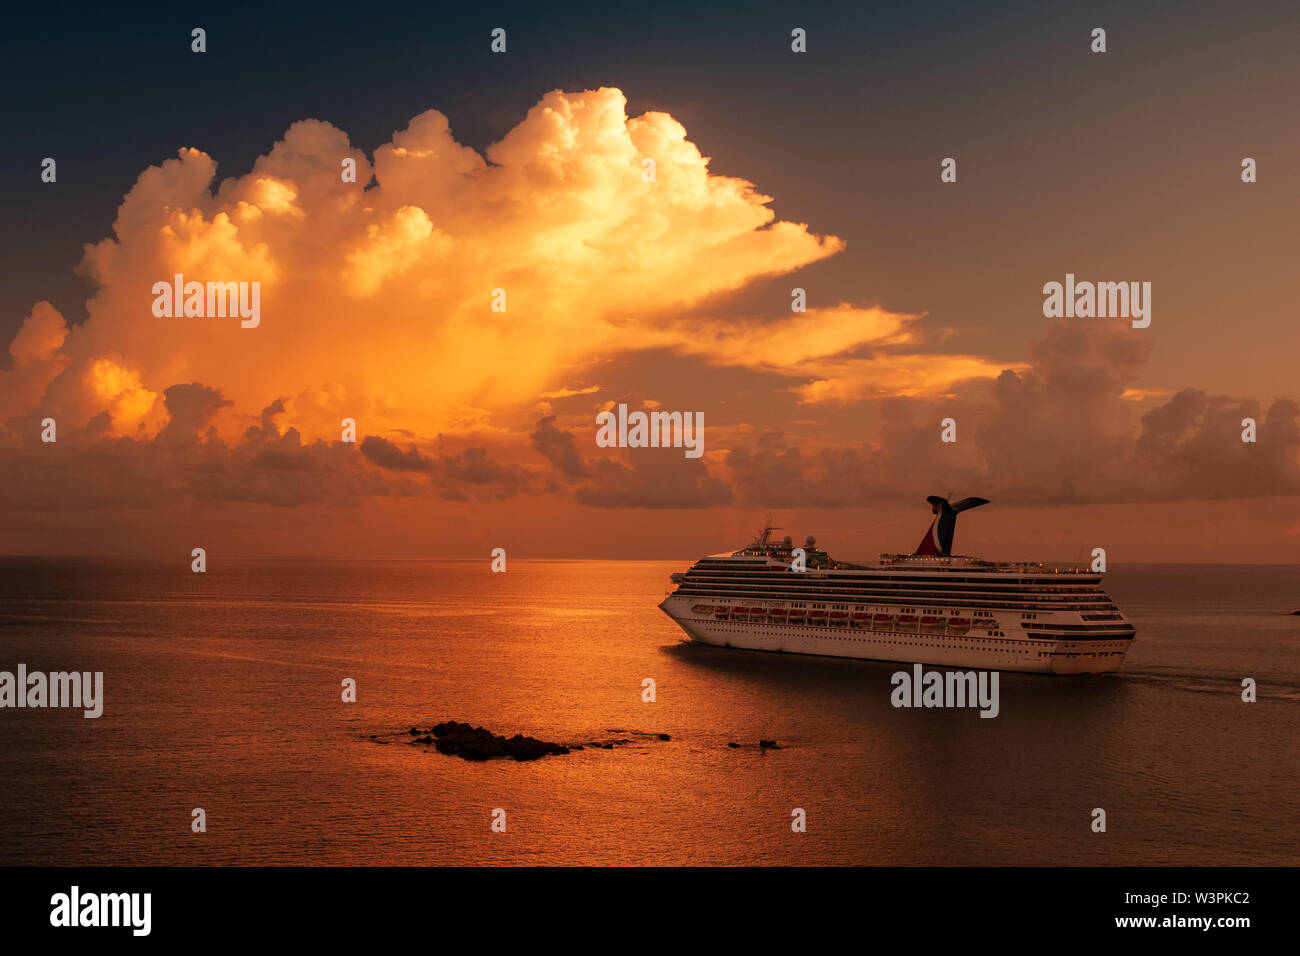 Saint Thomas / Virgin Islands / USA - September 5.2007: View on the massive white cruise ship sailing in the sunset with white clouds. Stock Photo